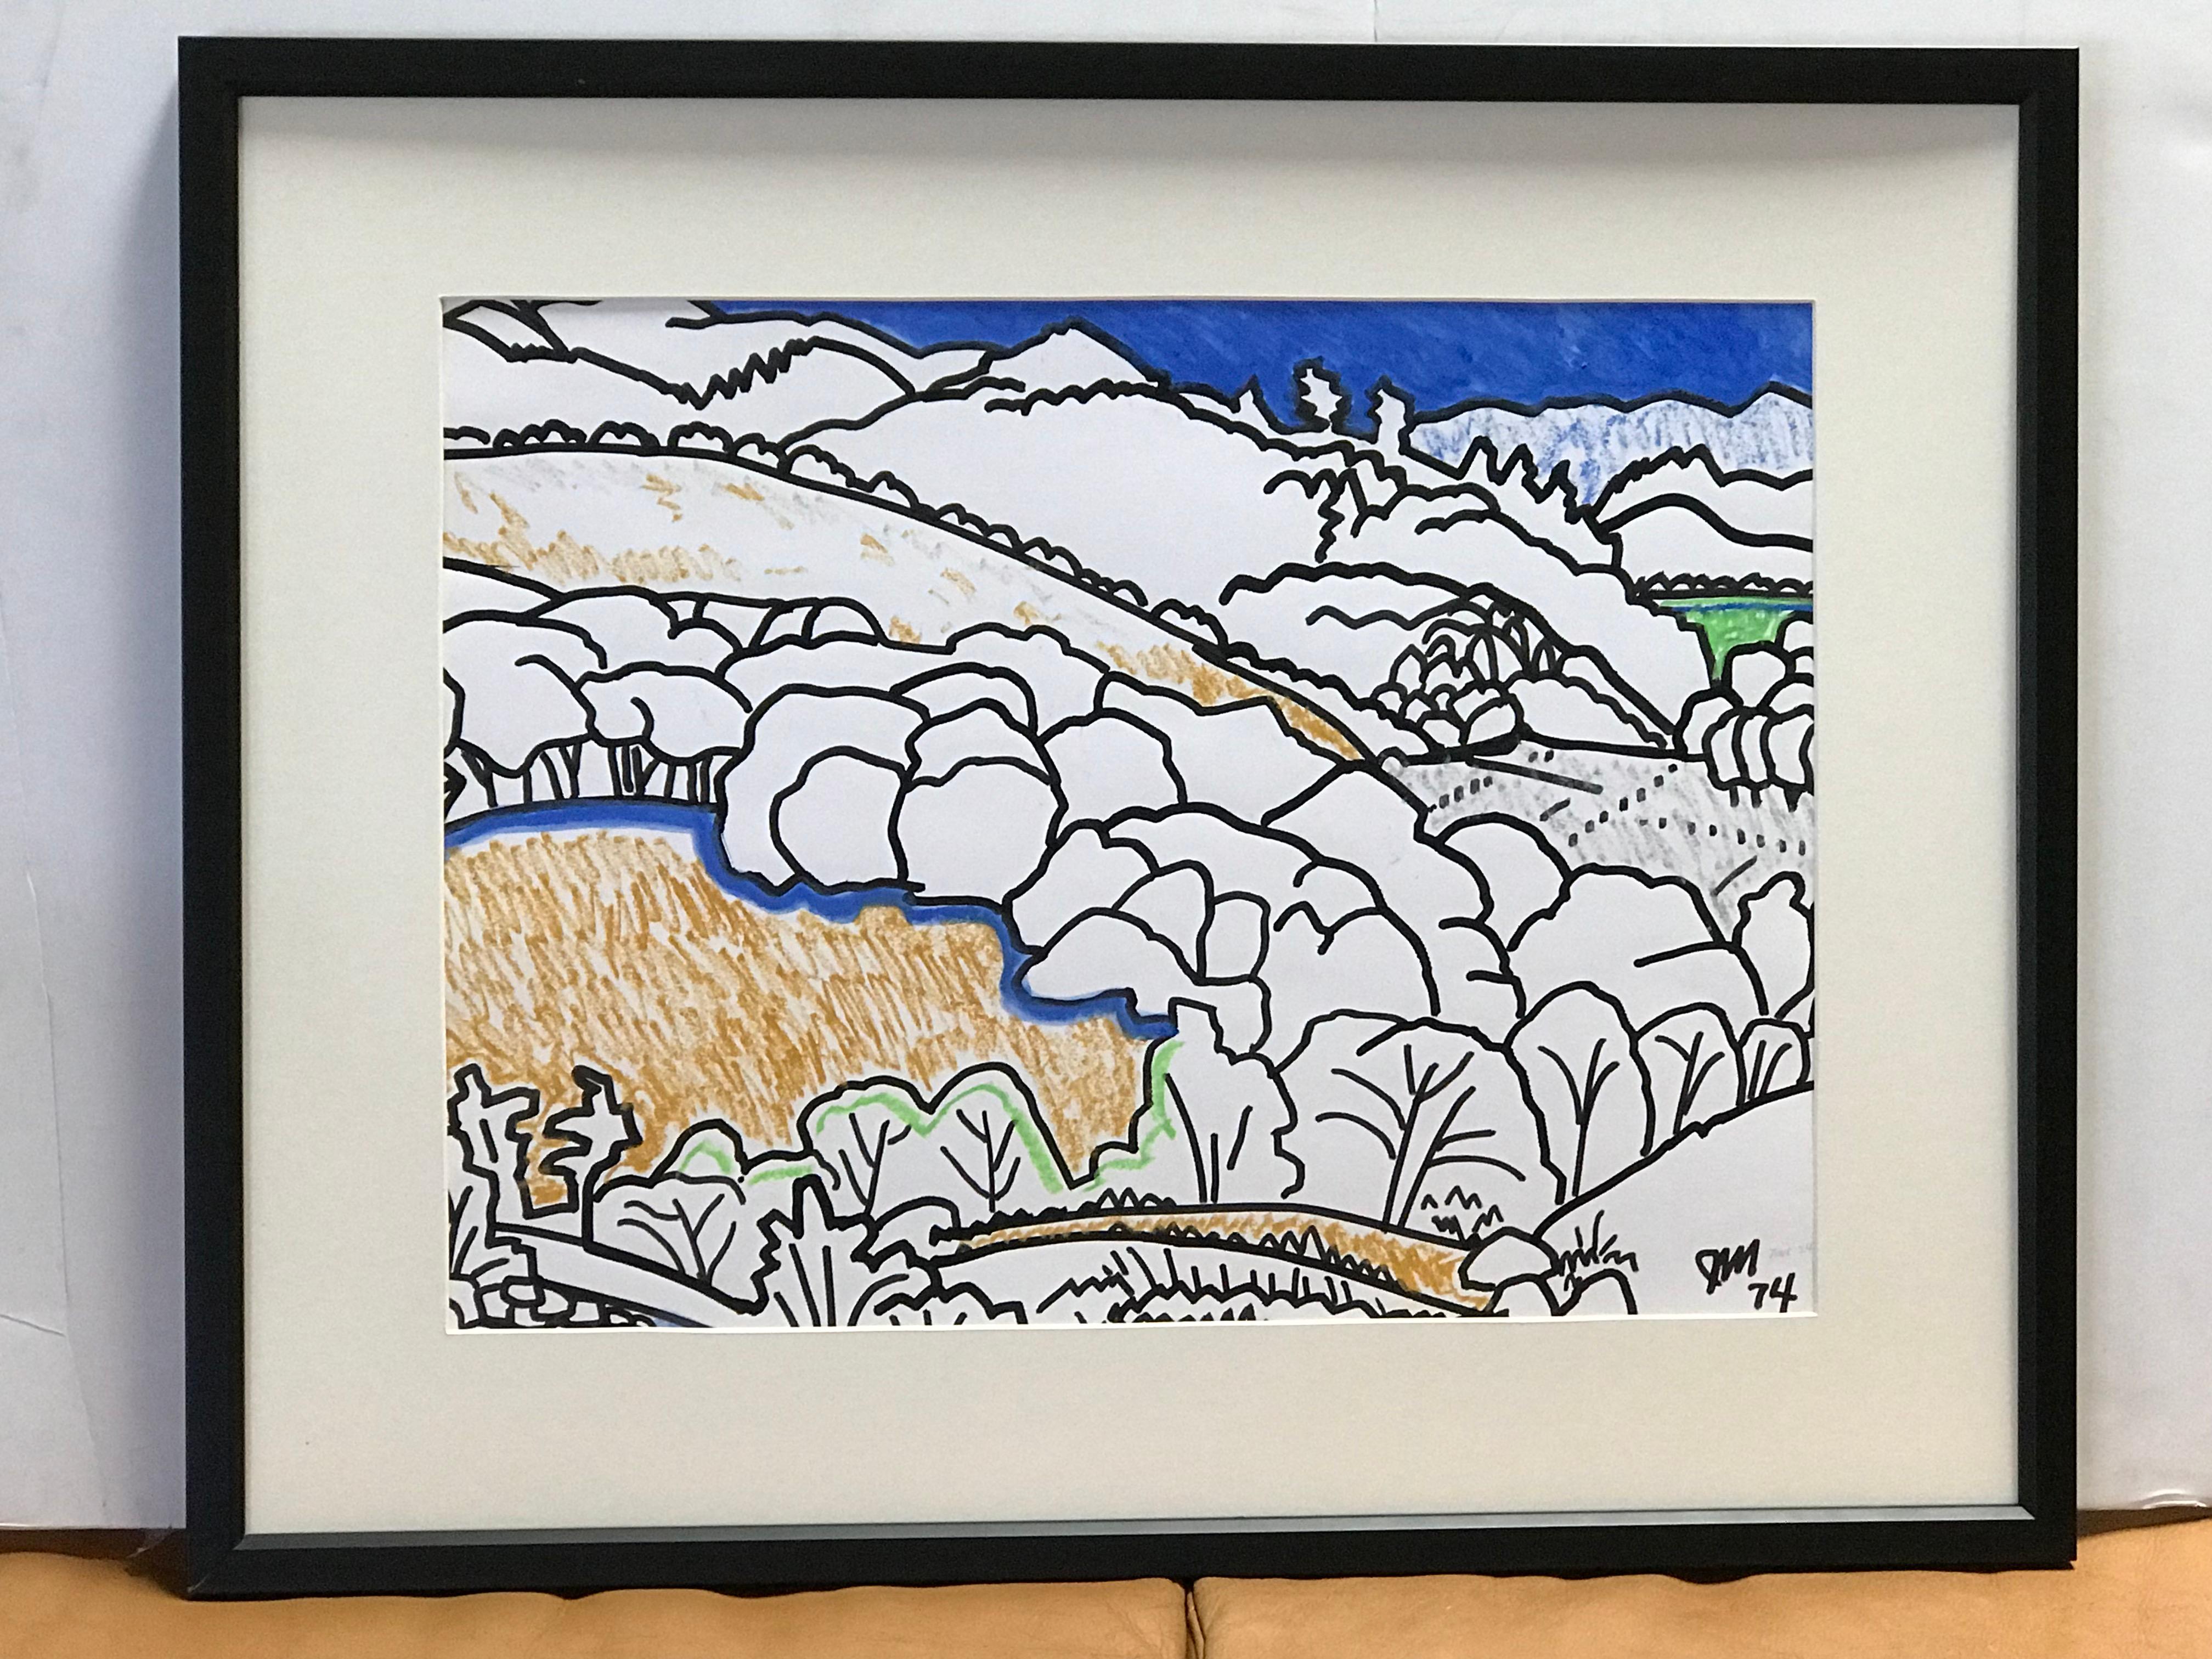 Framed serene landscape watercolor by James McCray (1912-1993), signed by the artist and dated 1976.
McCray taught at the California School of Fine Arts in San Francisco during the 1940s. He had solo and group exhibitions from 1935-1966. Among them: